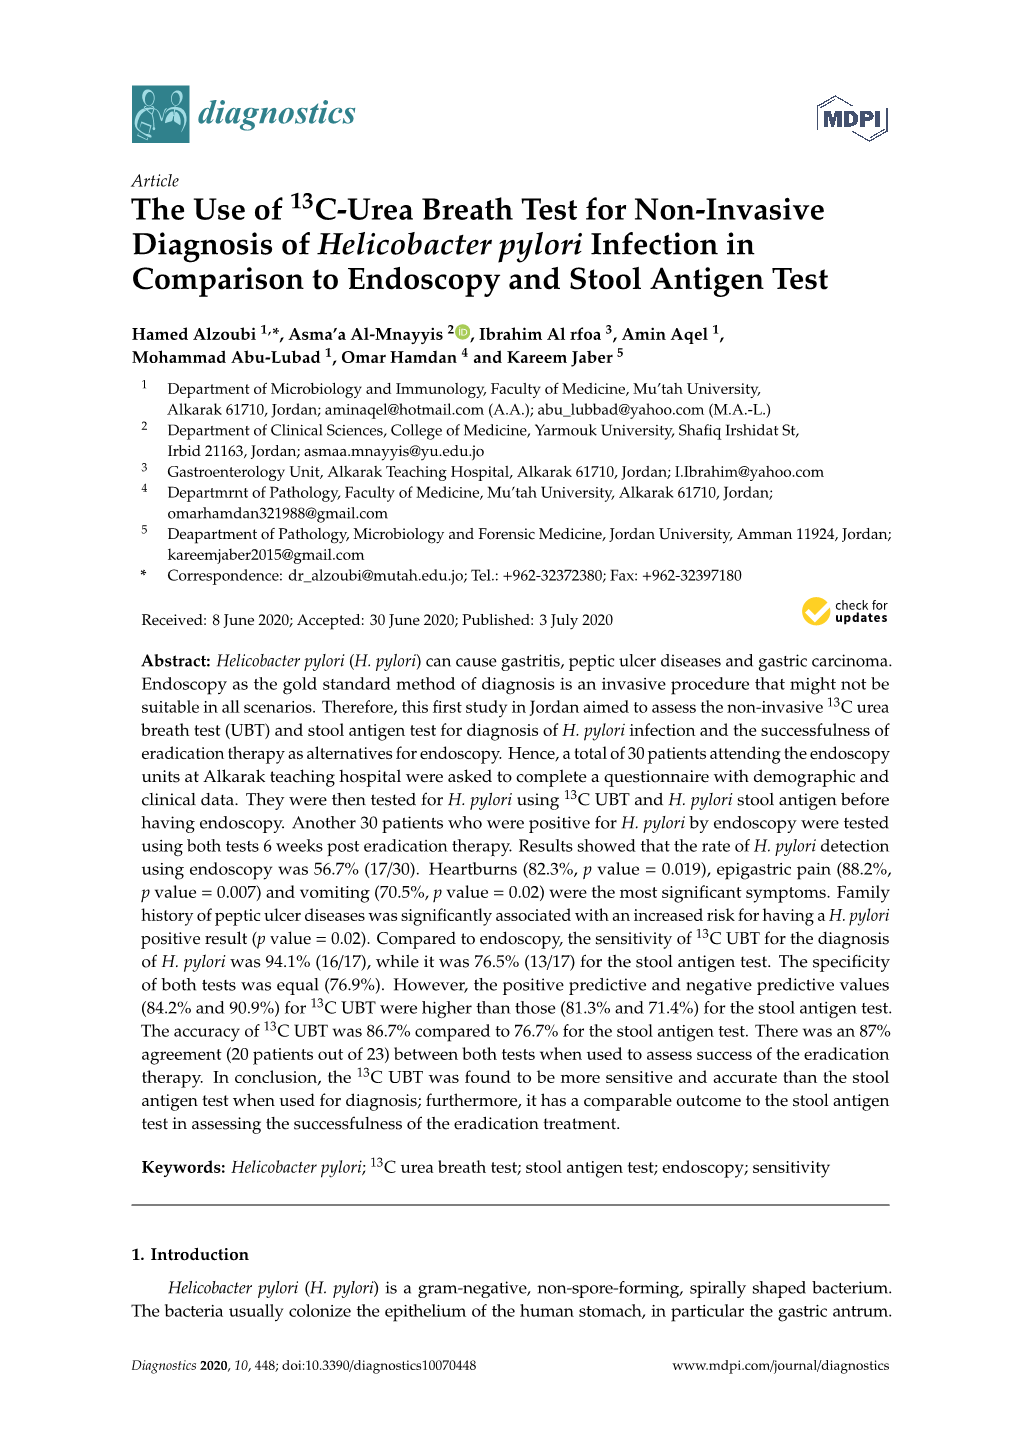 The Use of 13C-Urea Breath Test for Non-Invasive Diagnosis of Helicobacter Pylori Infection in Comparison to Endoscopy and Stool Antigen Test